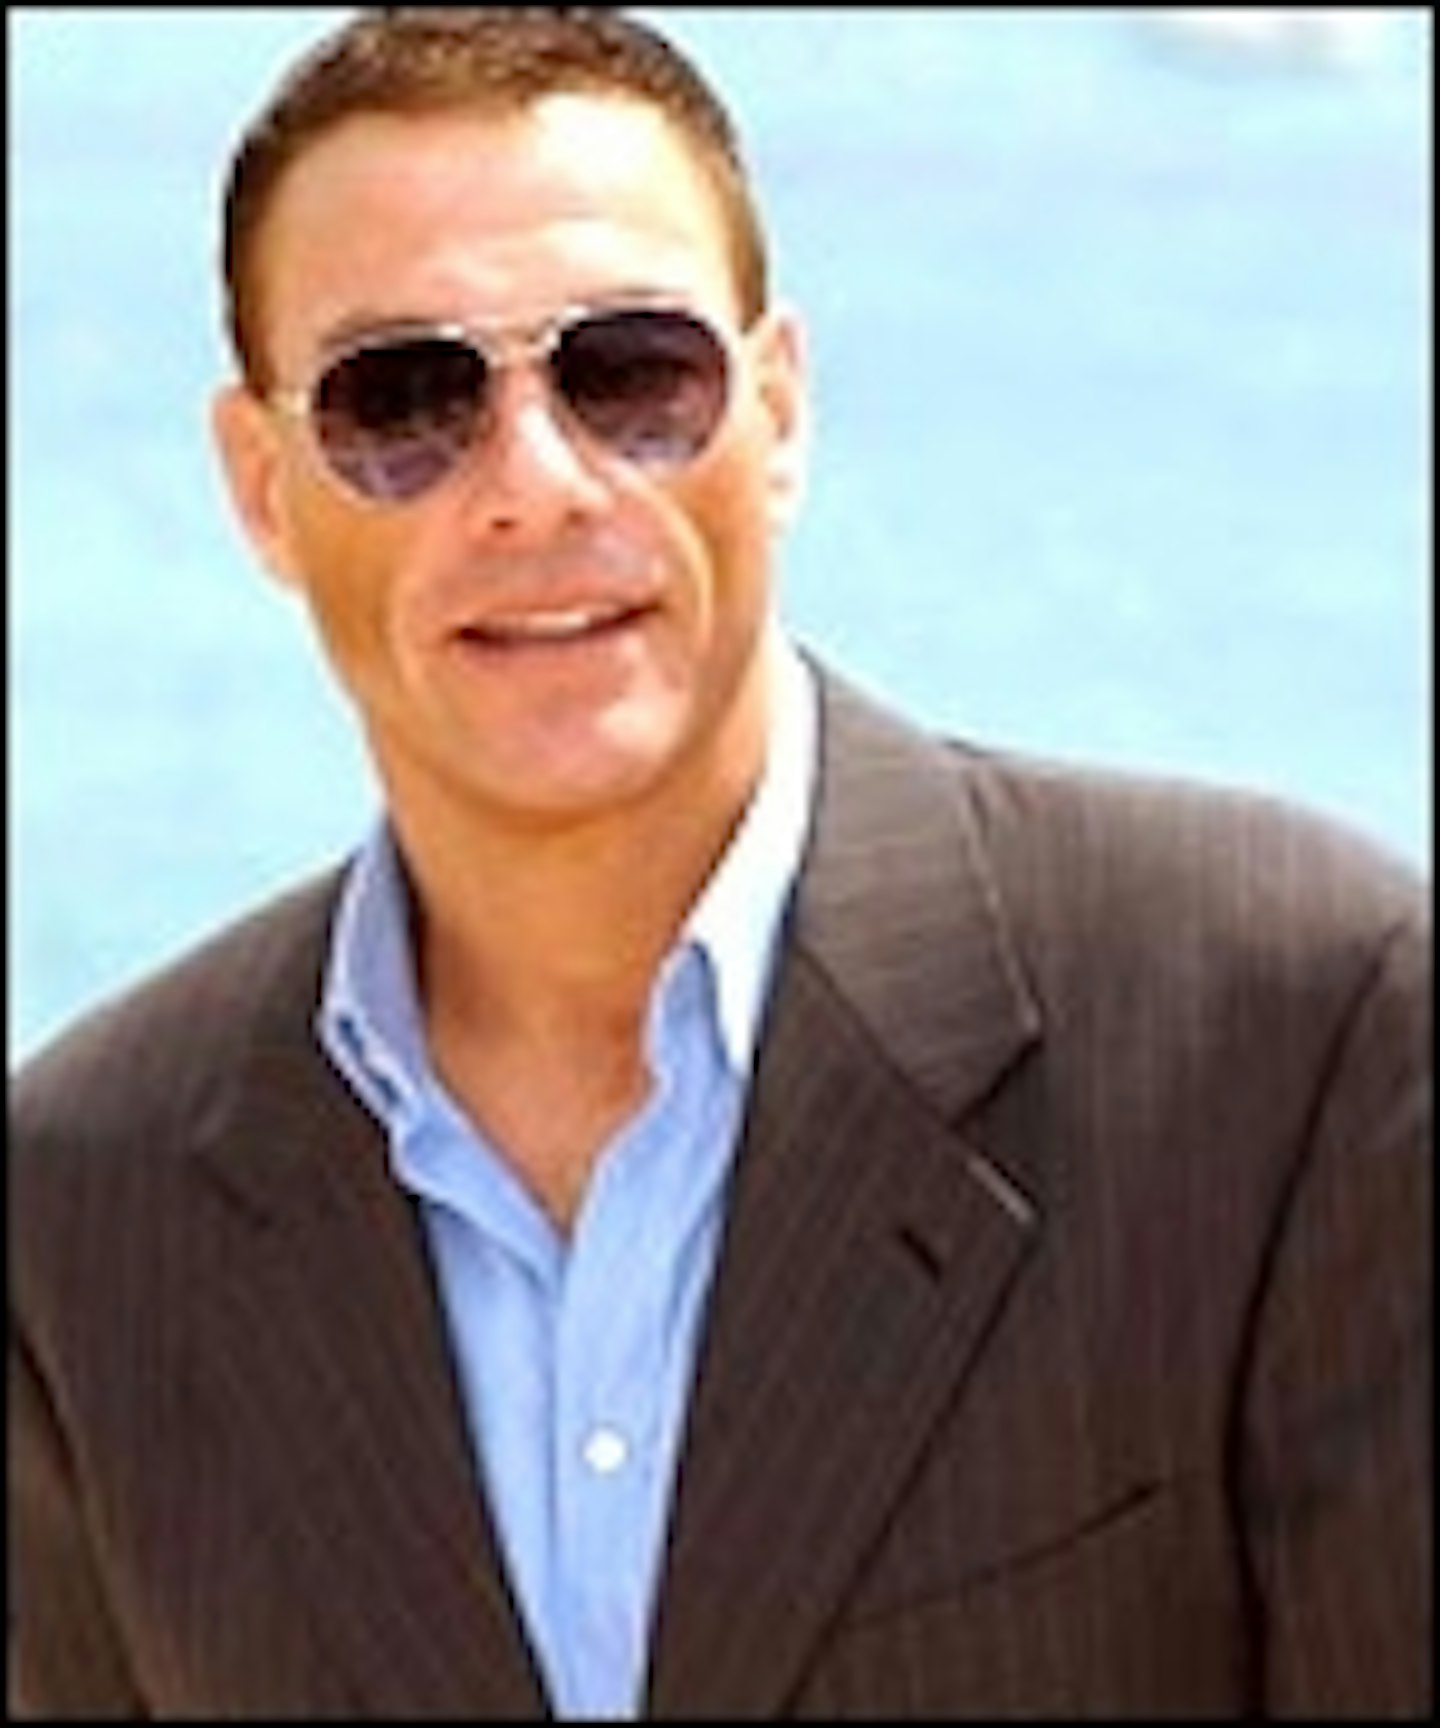 Van Damme Said No To Street Fighter